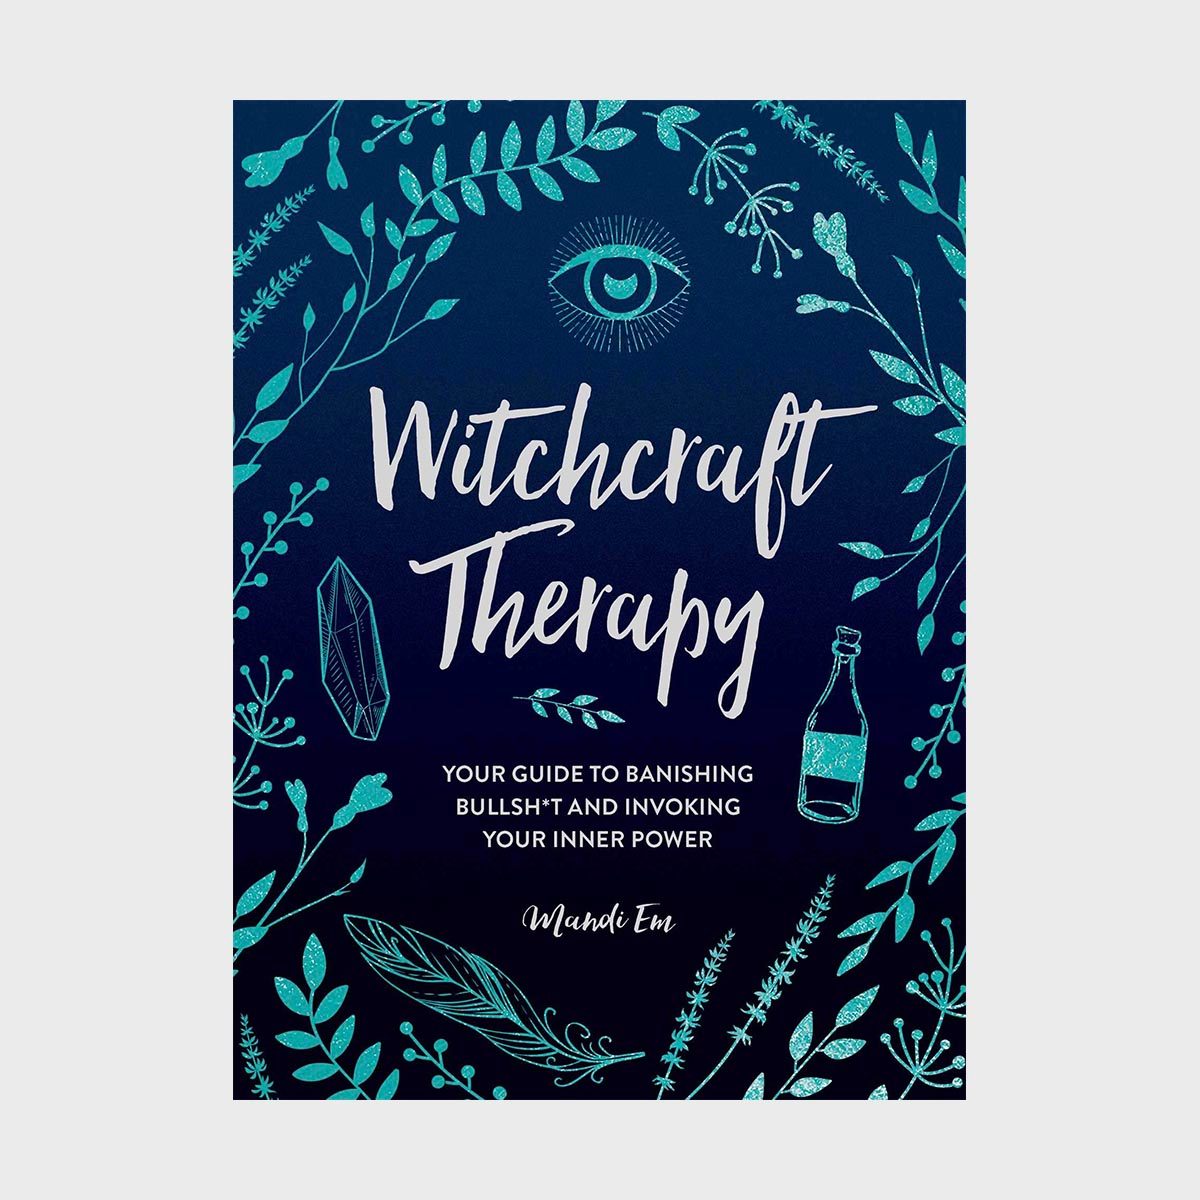 <p class=""><strong>Release date:</strong> May 4, 2021</p> <p>Popular Instagrammer, wellness witch and author Mandi Em writes a not-your-average <a href="https://www.rd.com/list/inspirational-books/" rel="noopener noreferrer">self-help book</a> that explores how to deal with life's challenges through hands-on magical solutions. <a href="https://www.amazon.com/Witchcraft-Therapy-Banishing-Bullsh-Invoking/dp/1507215835/" rel="noopener noreferrer"><em>Witchcraft Therapy</em></a> will teach you how to tap into your inner power and use intentions, mindful manifestation, divination and righteous indignation to cope with whatever life throws at you. In her fun, upbeat and friendly voice, Em manages to turn real-life witchery into a tangible and actionable expression that anyone can try.</p> <p class="listicle-page__cta-button-shop"><a class="shop-btn" href="https://www.amazon.com/Witchcraft-Therapy-Banishing-Bullsh-Invoking/dp/1507215835/">Shop Now</a></p>